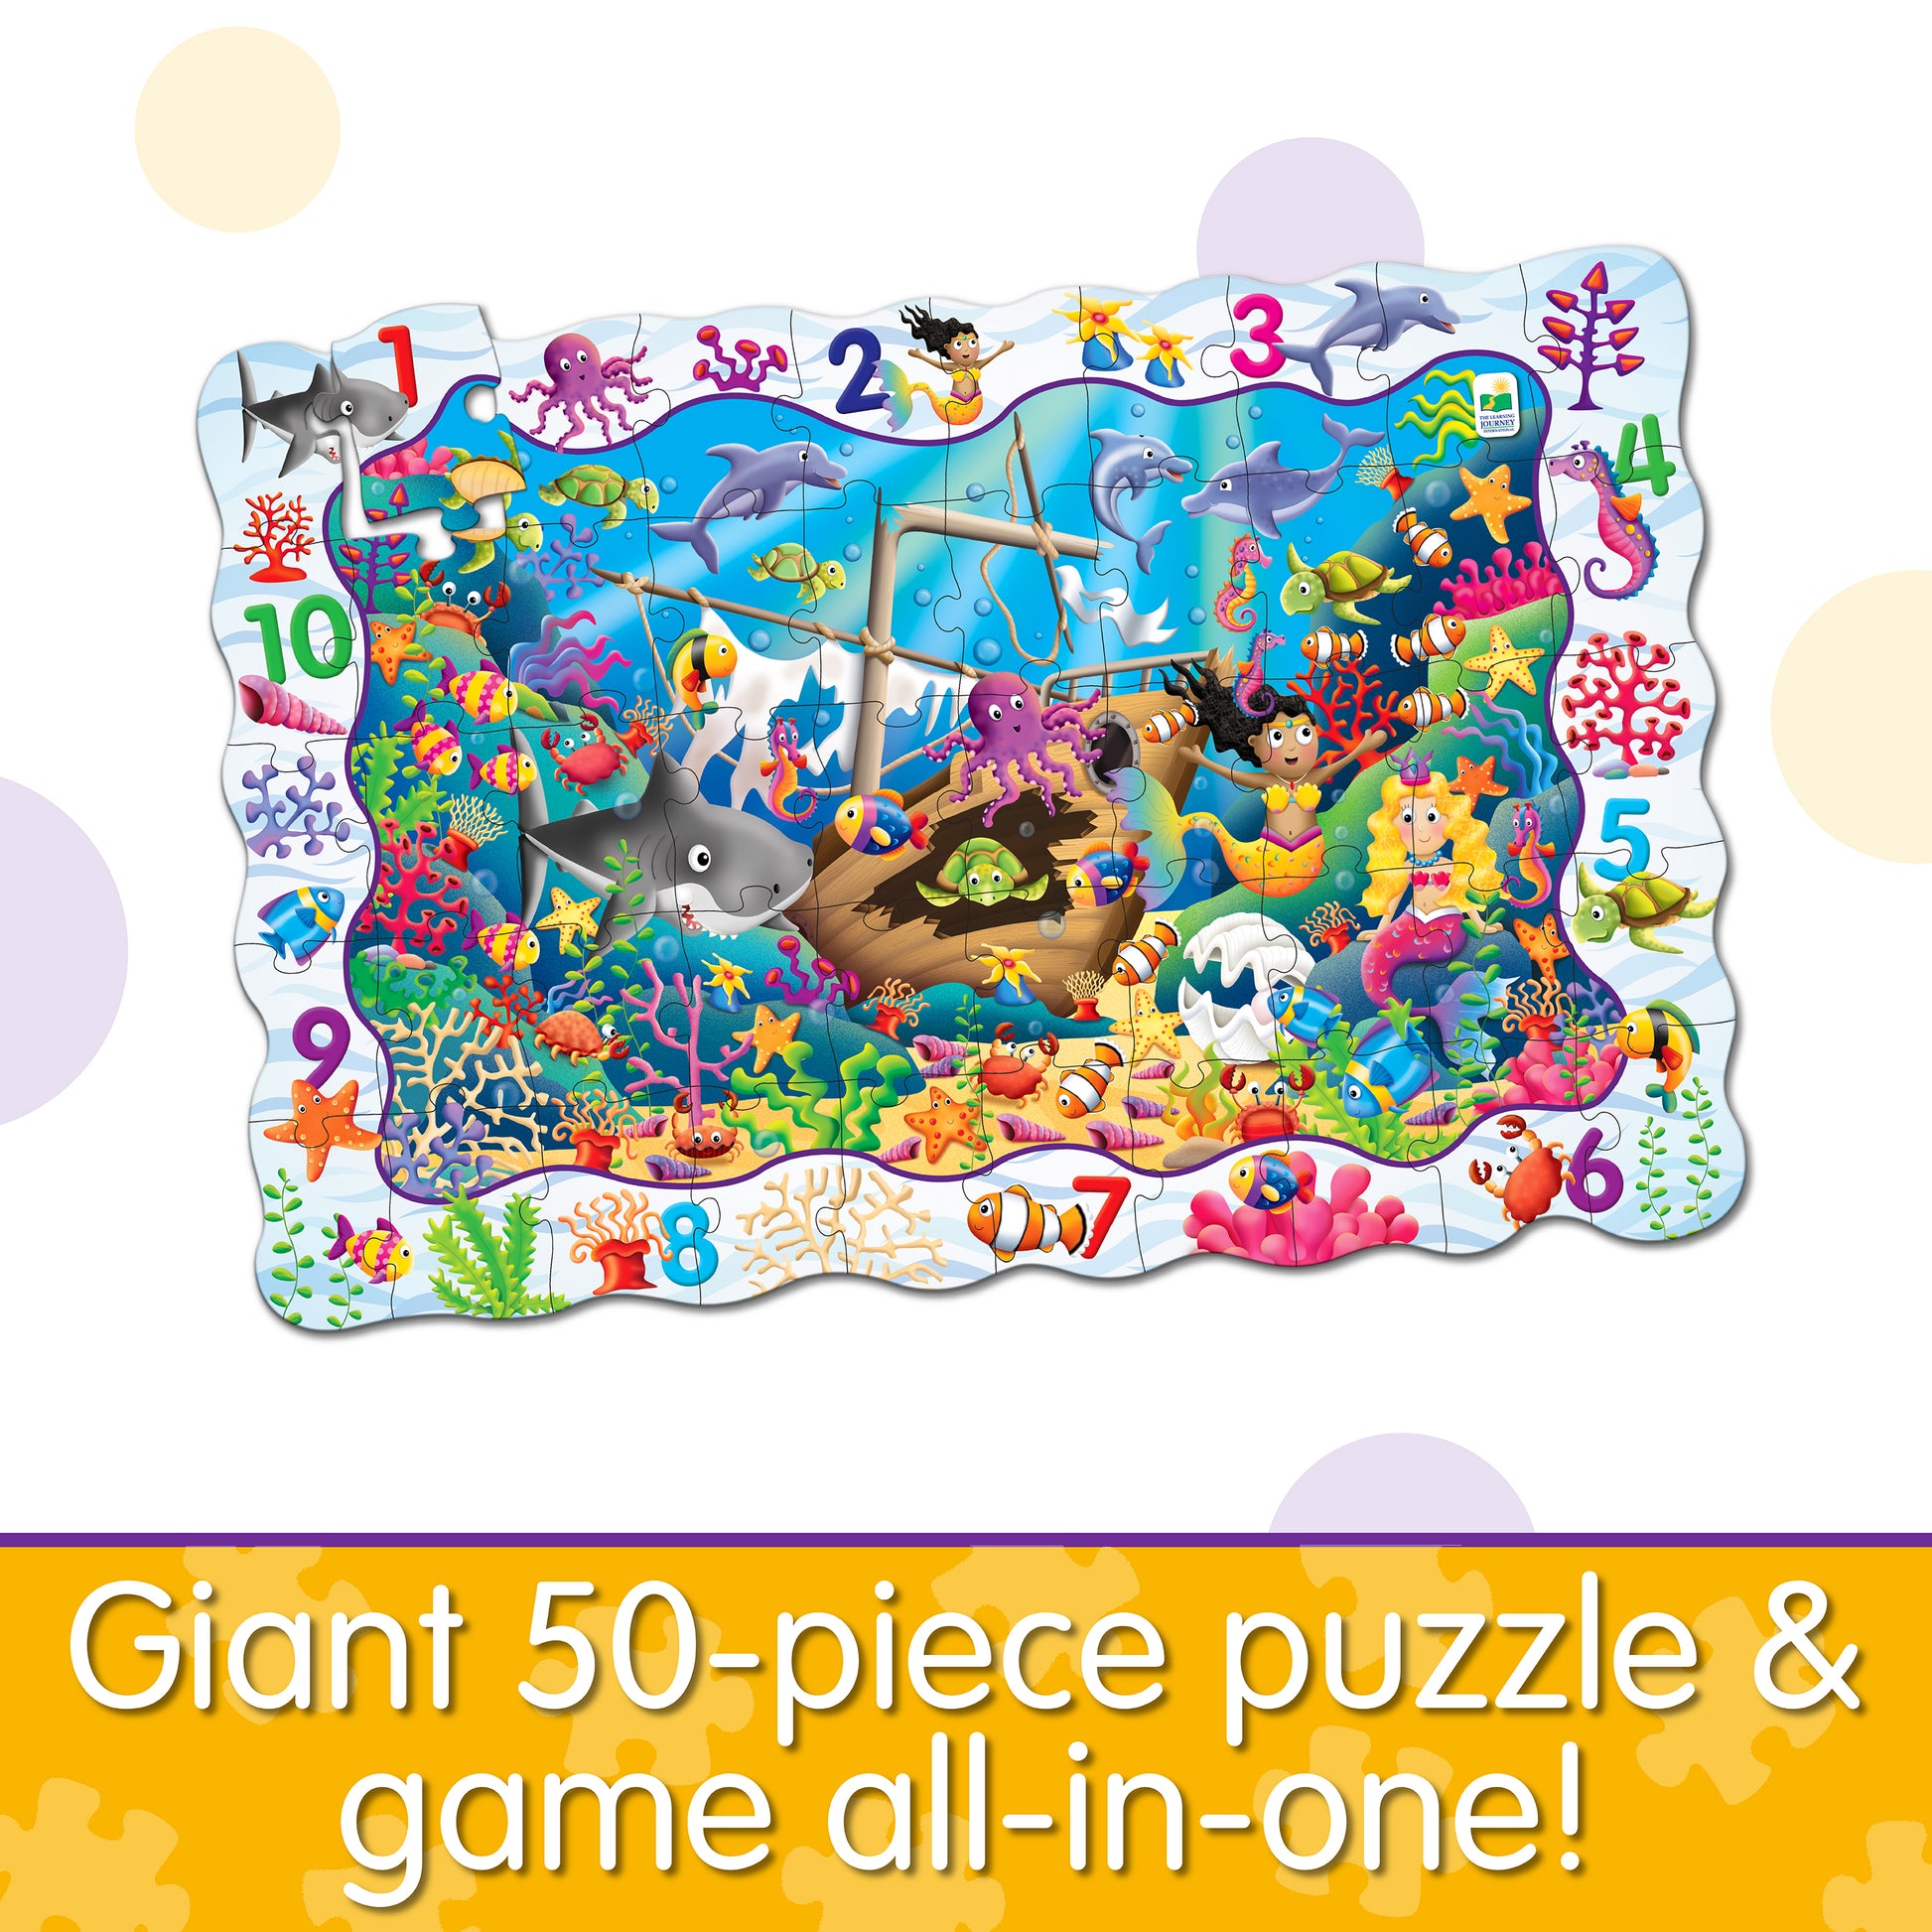 Infographic about Find It - 123 that says, "Giant 50-piece puzzle and game all-in-one!"